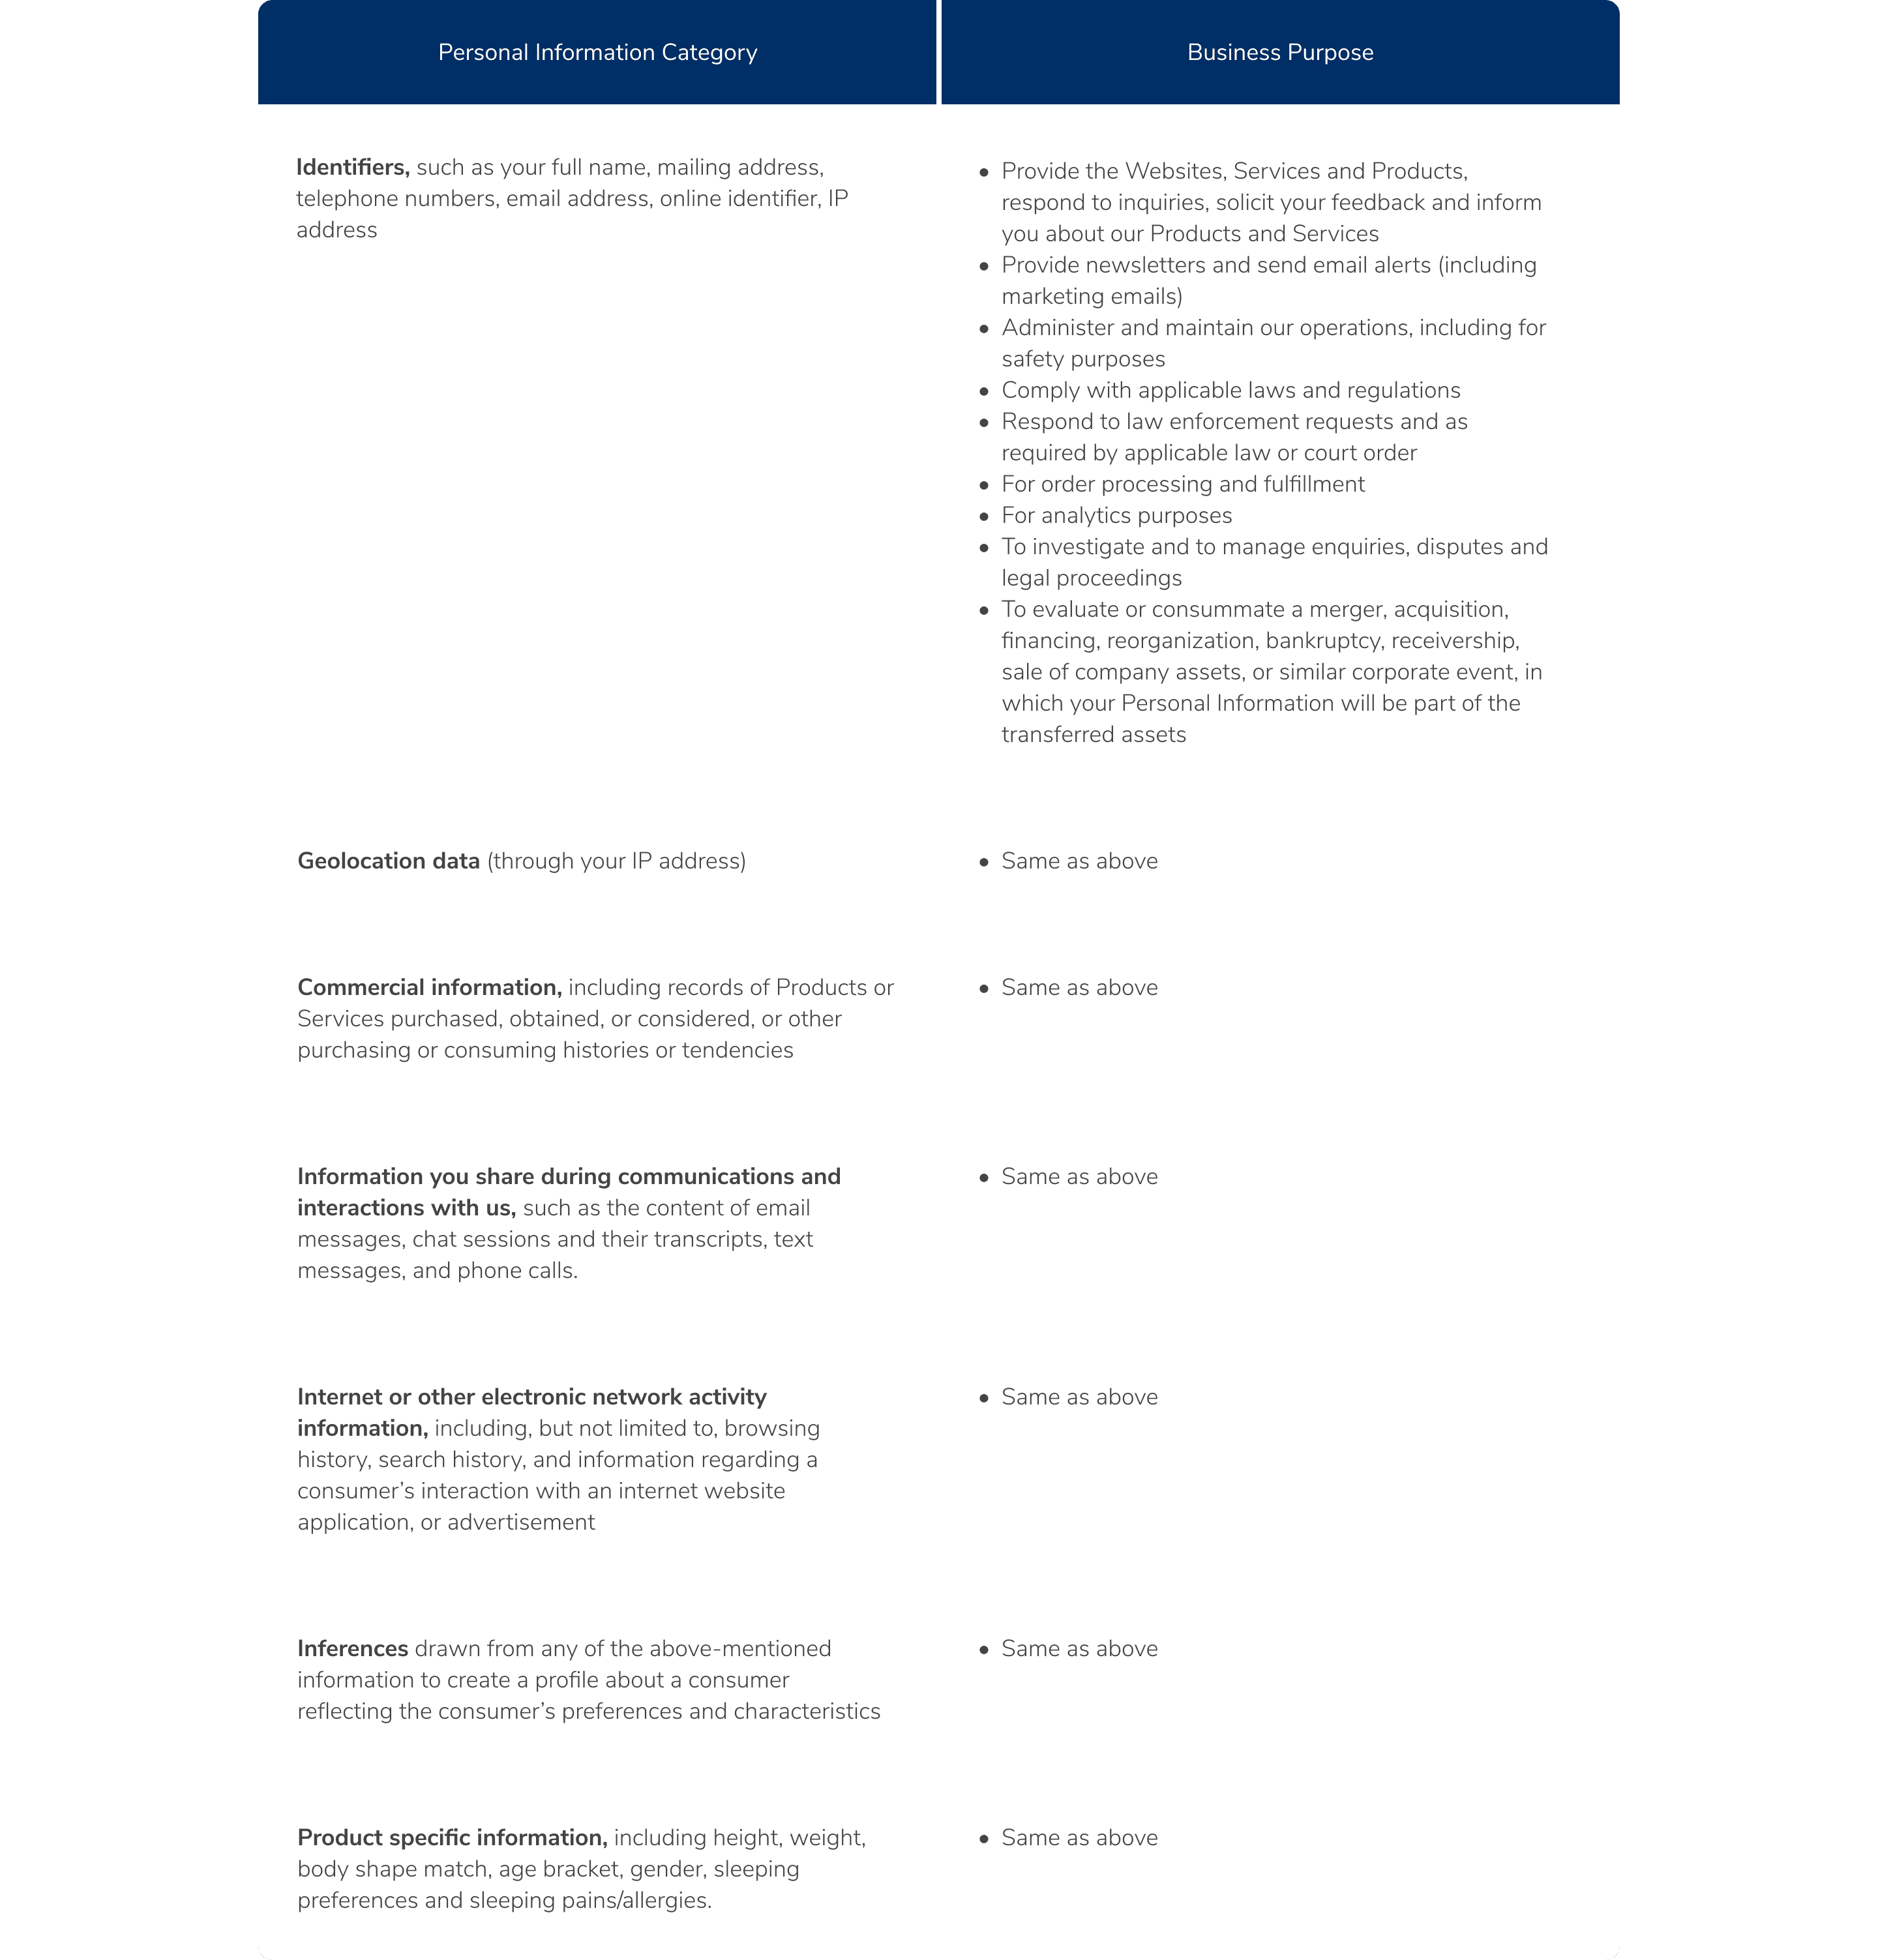 Helix Privacy Policy